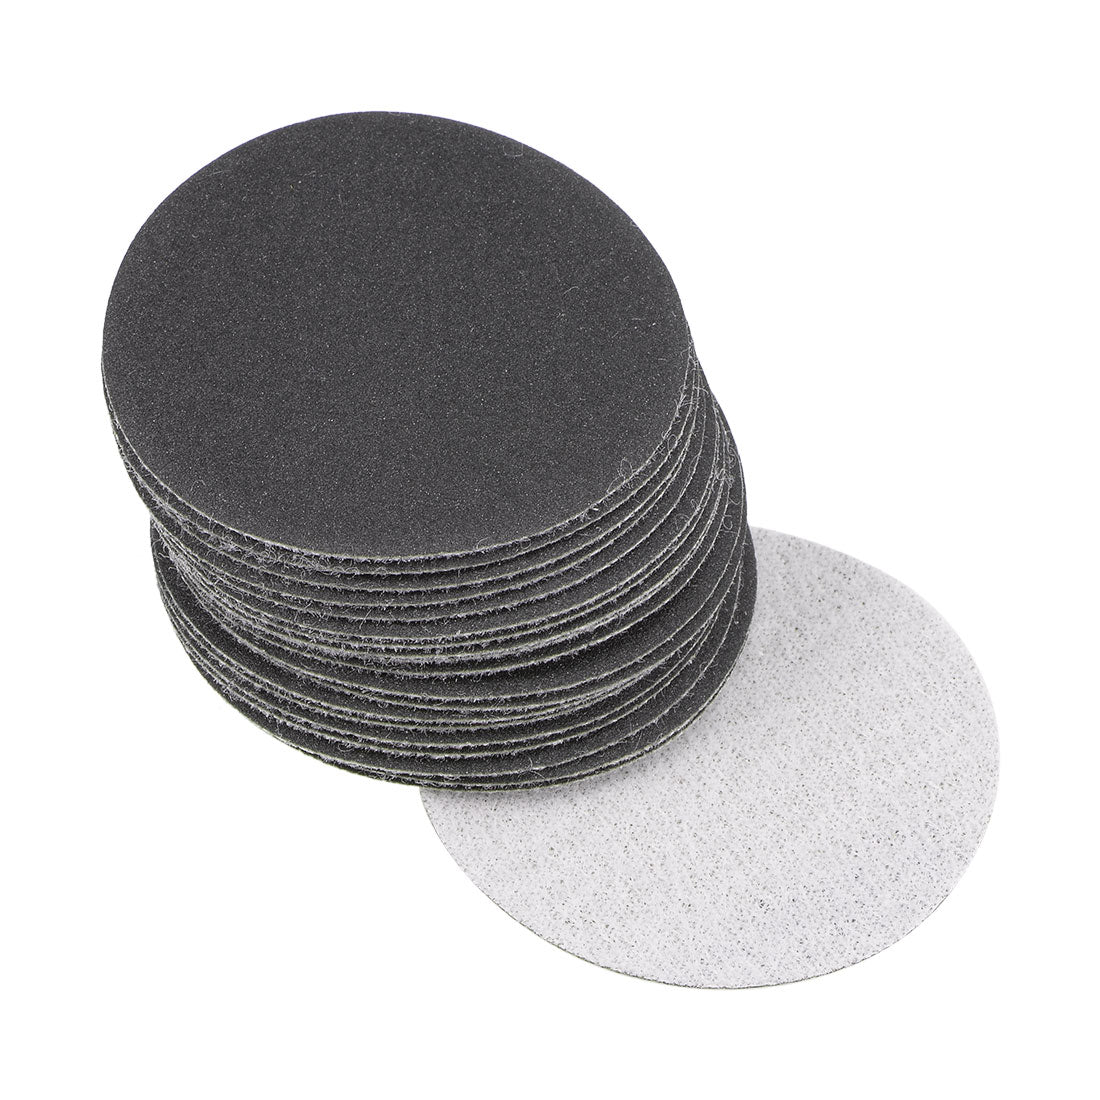 uxcell Uxcell 2 inch Wet Dry Disc 400 Grit Hook and Loop Sanding Discs Silicon Carbide 20pcs